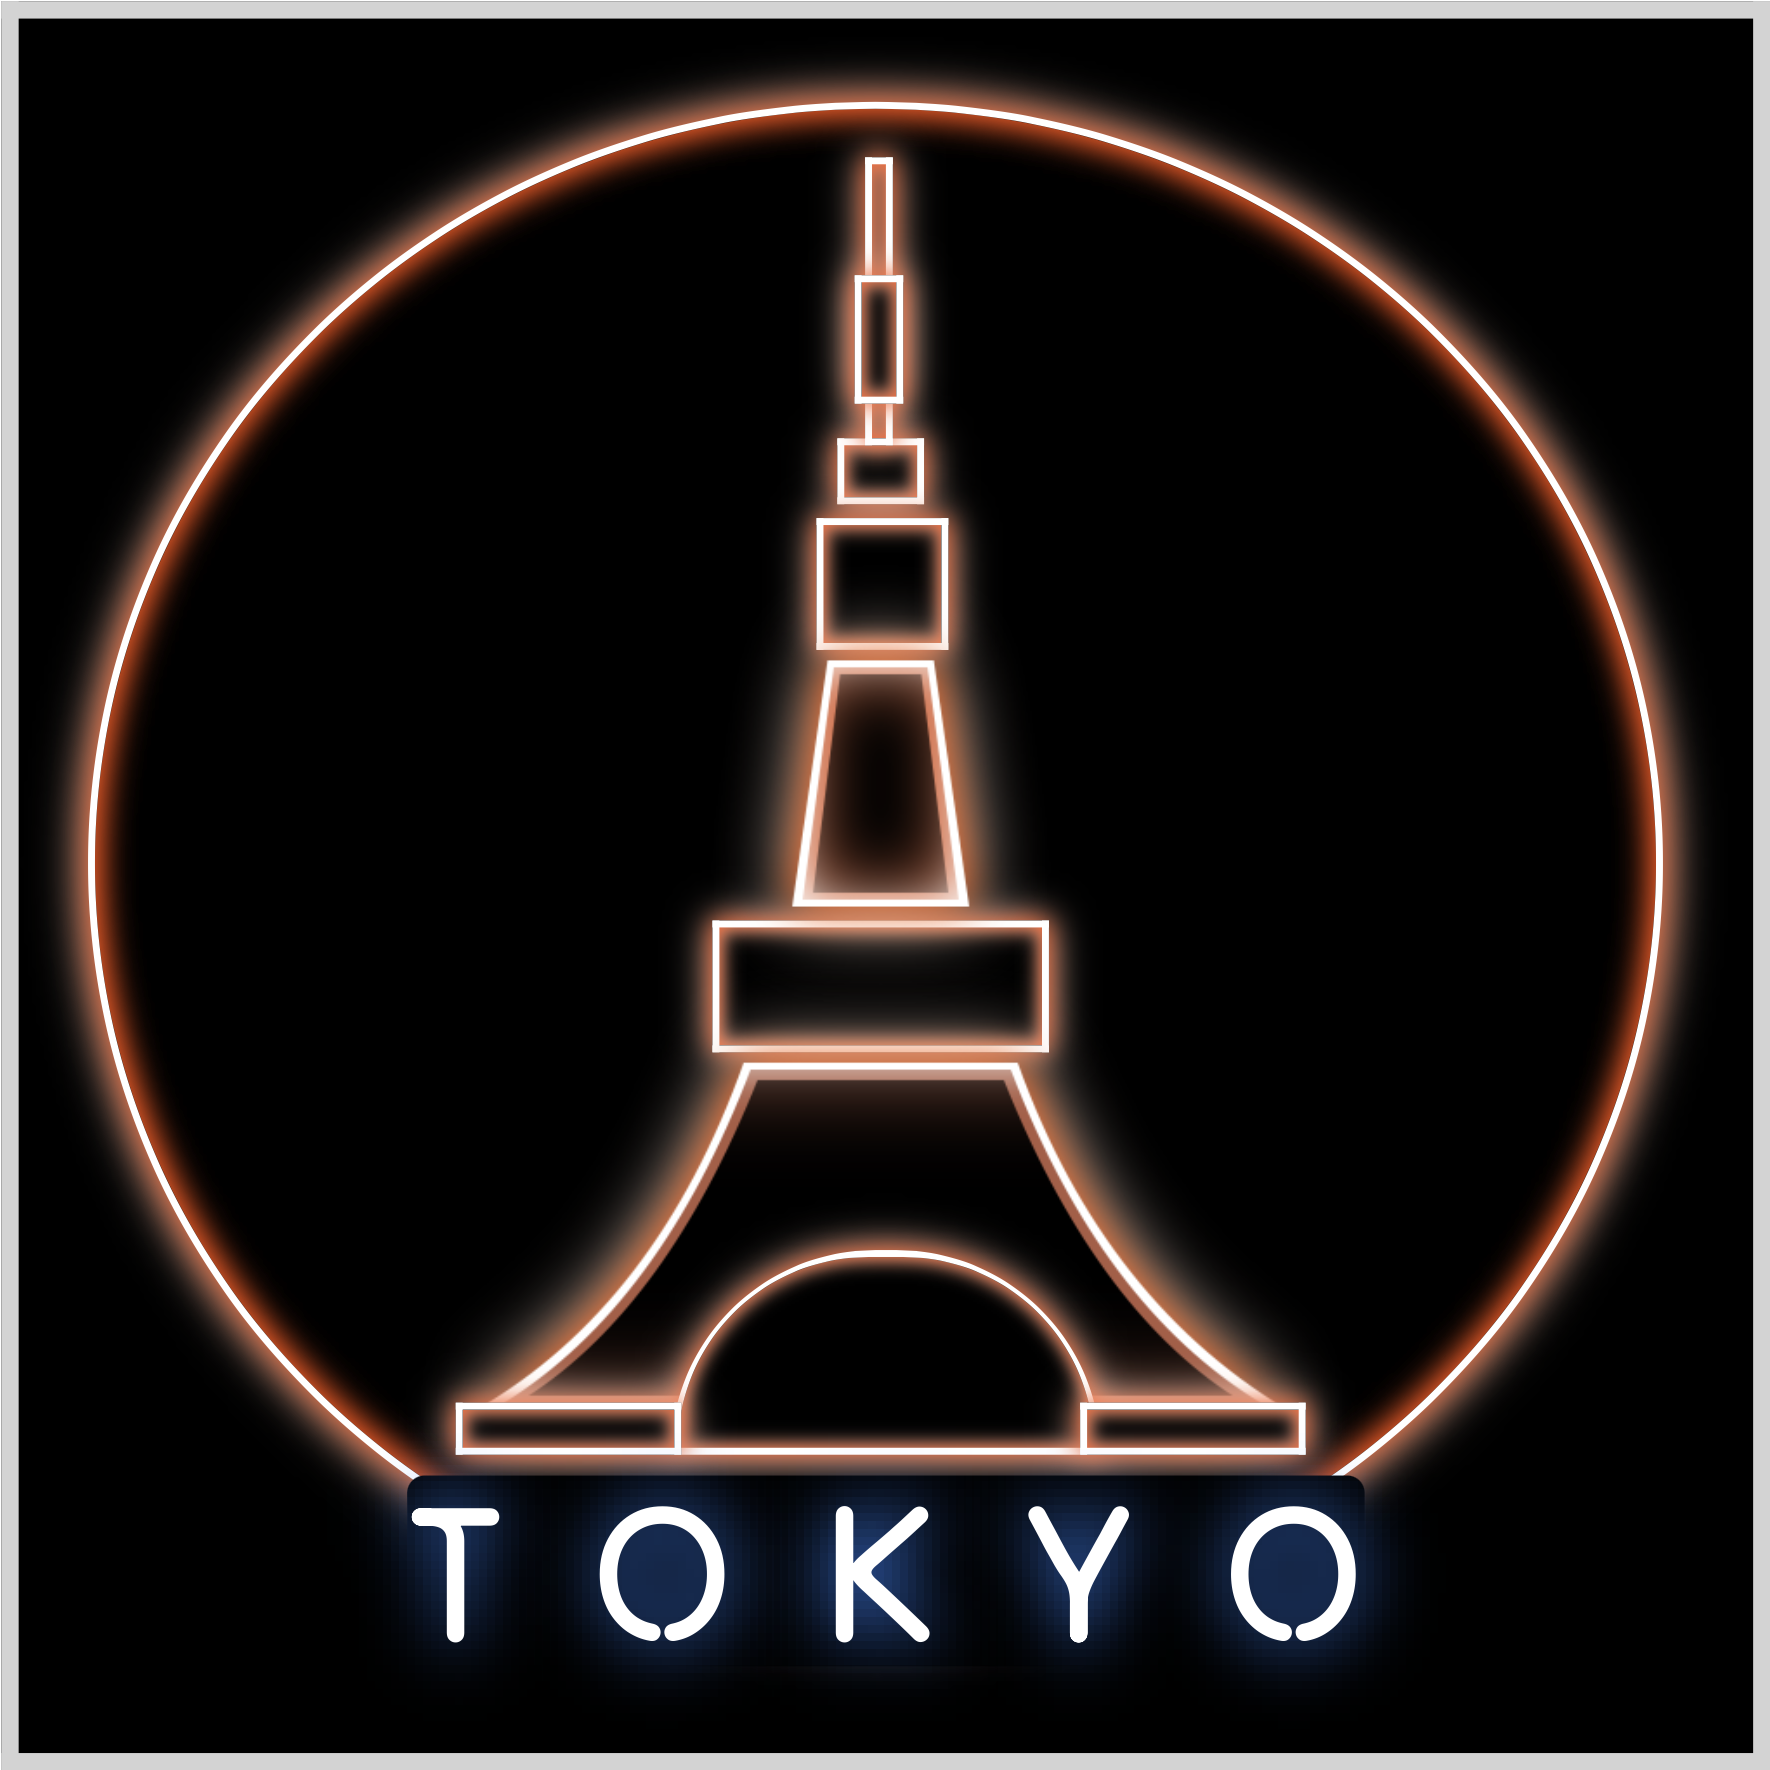 Tokyo Text - Blue shadow applied